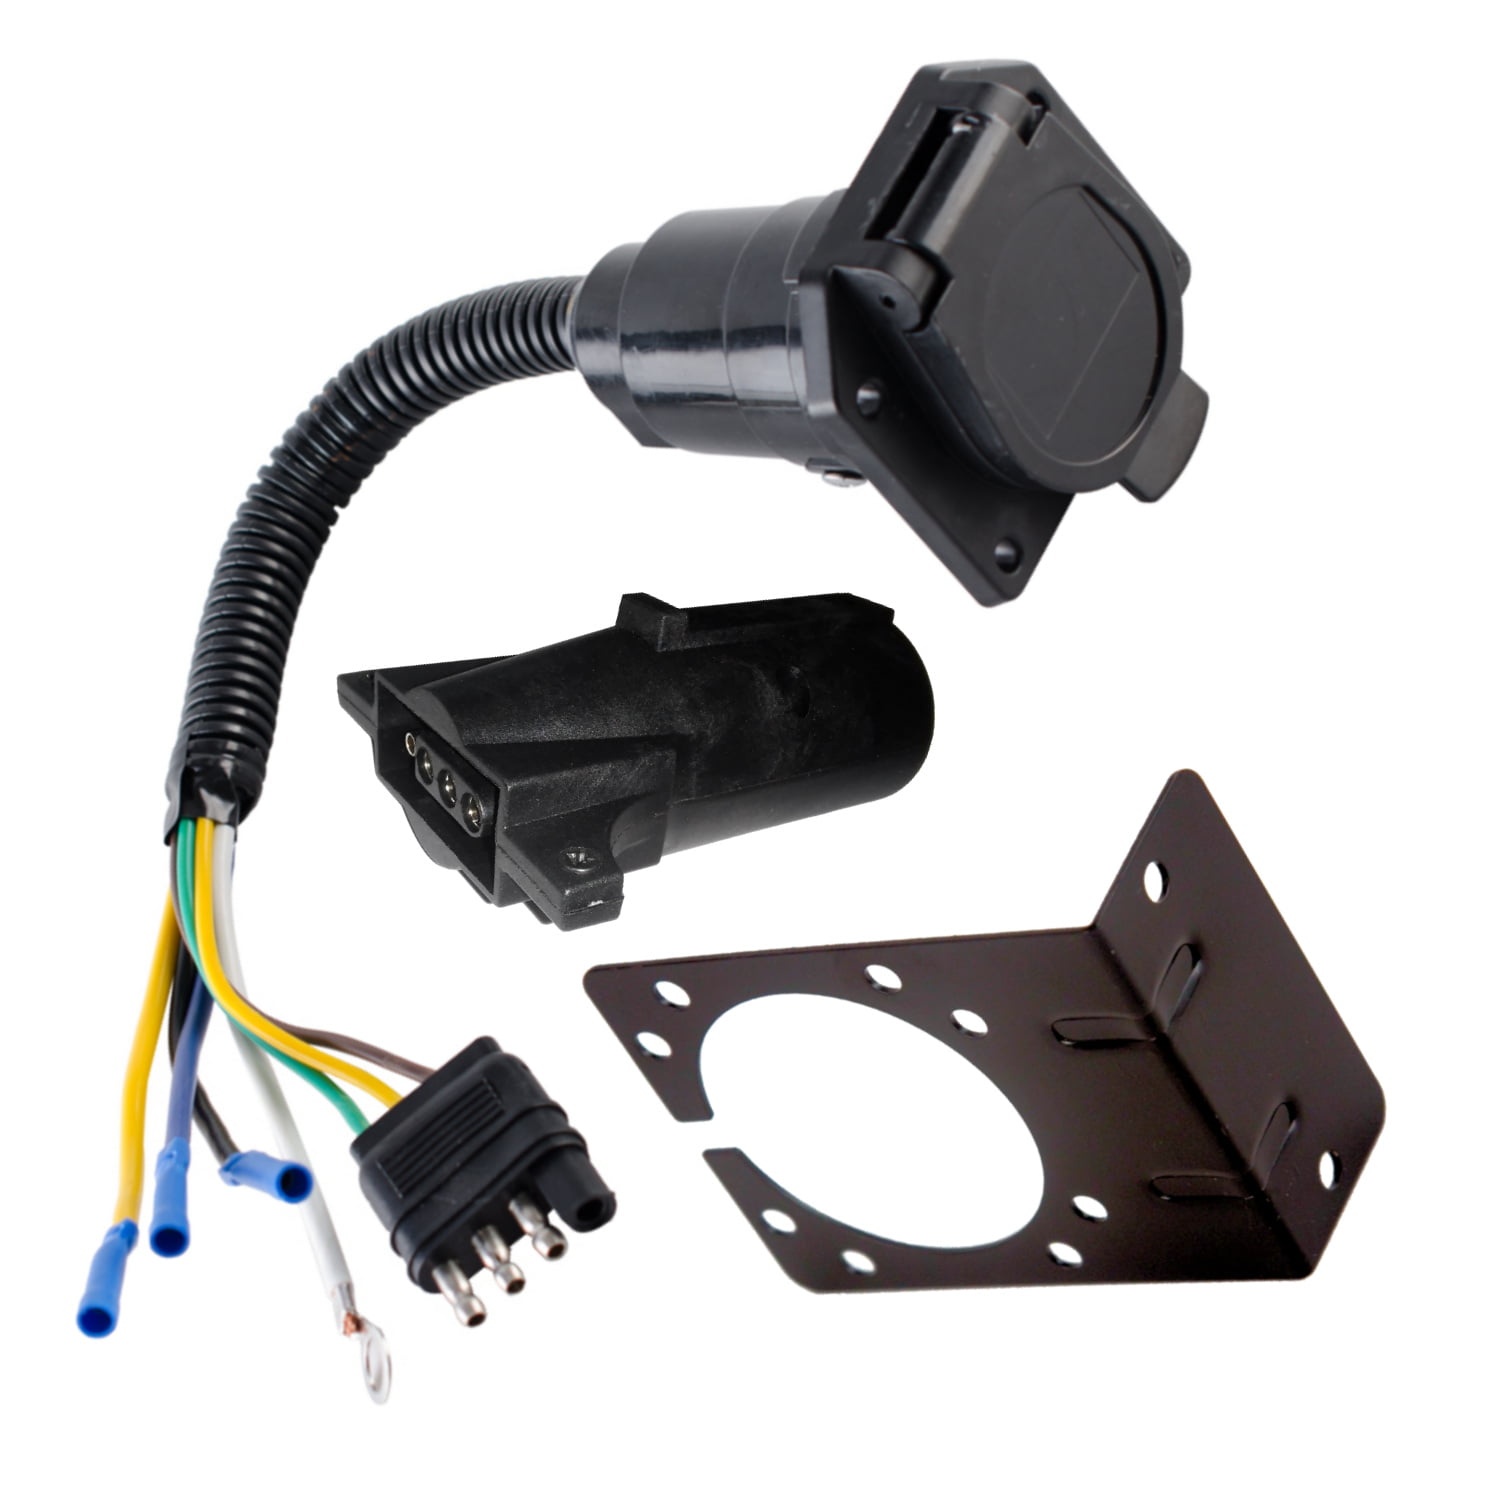 4 Wire Flat to 7 Way Adapter RV Trailer Wire Harness With Bracket and Adapter - Walmart.com ...